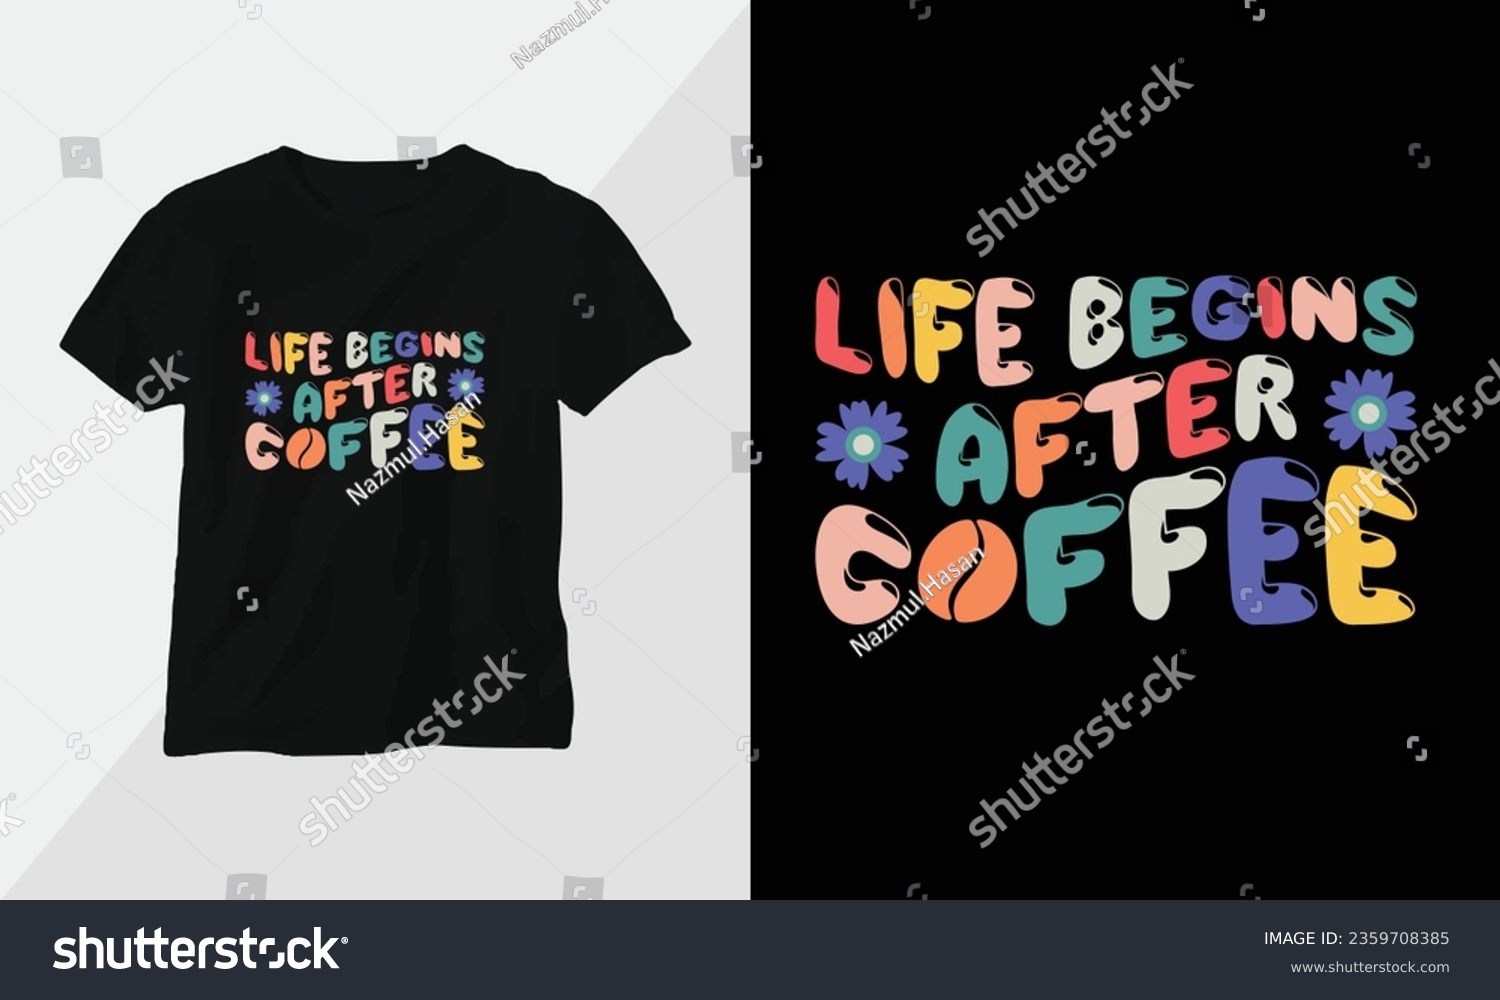 SVG of Life begins after coffee - Retro Groovy Inspirational T-shirt Design with retro style svg